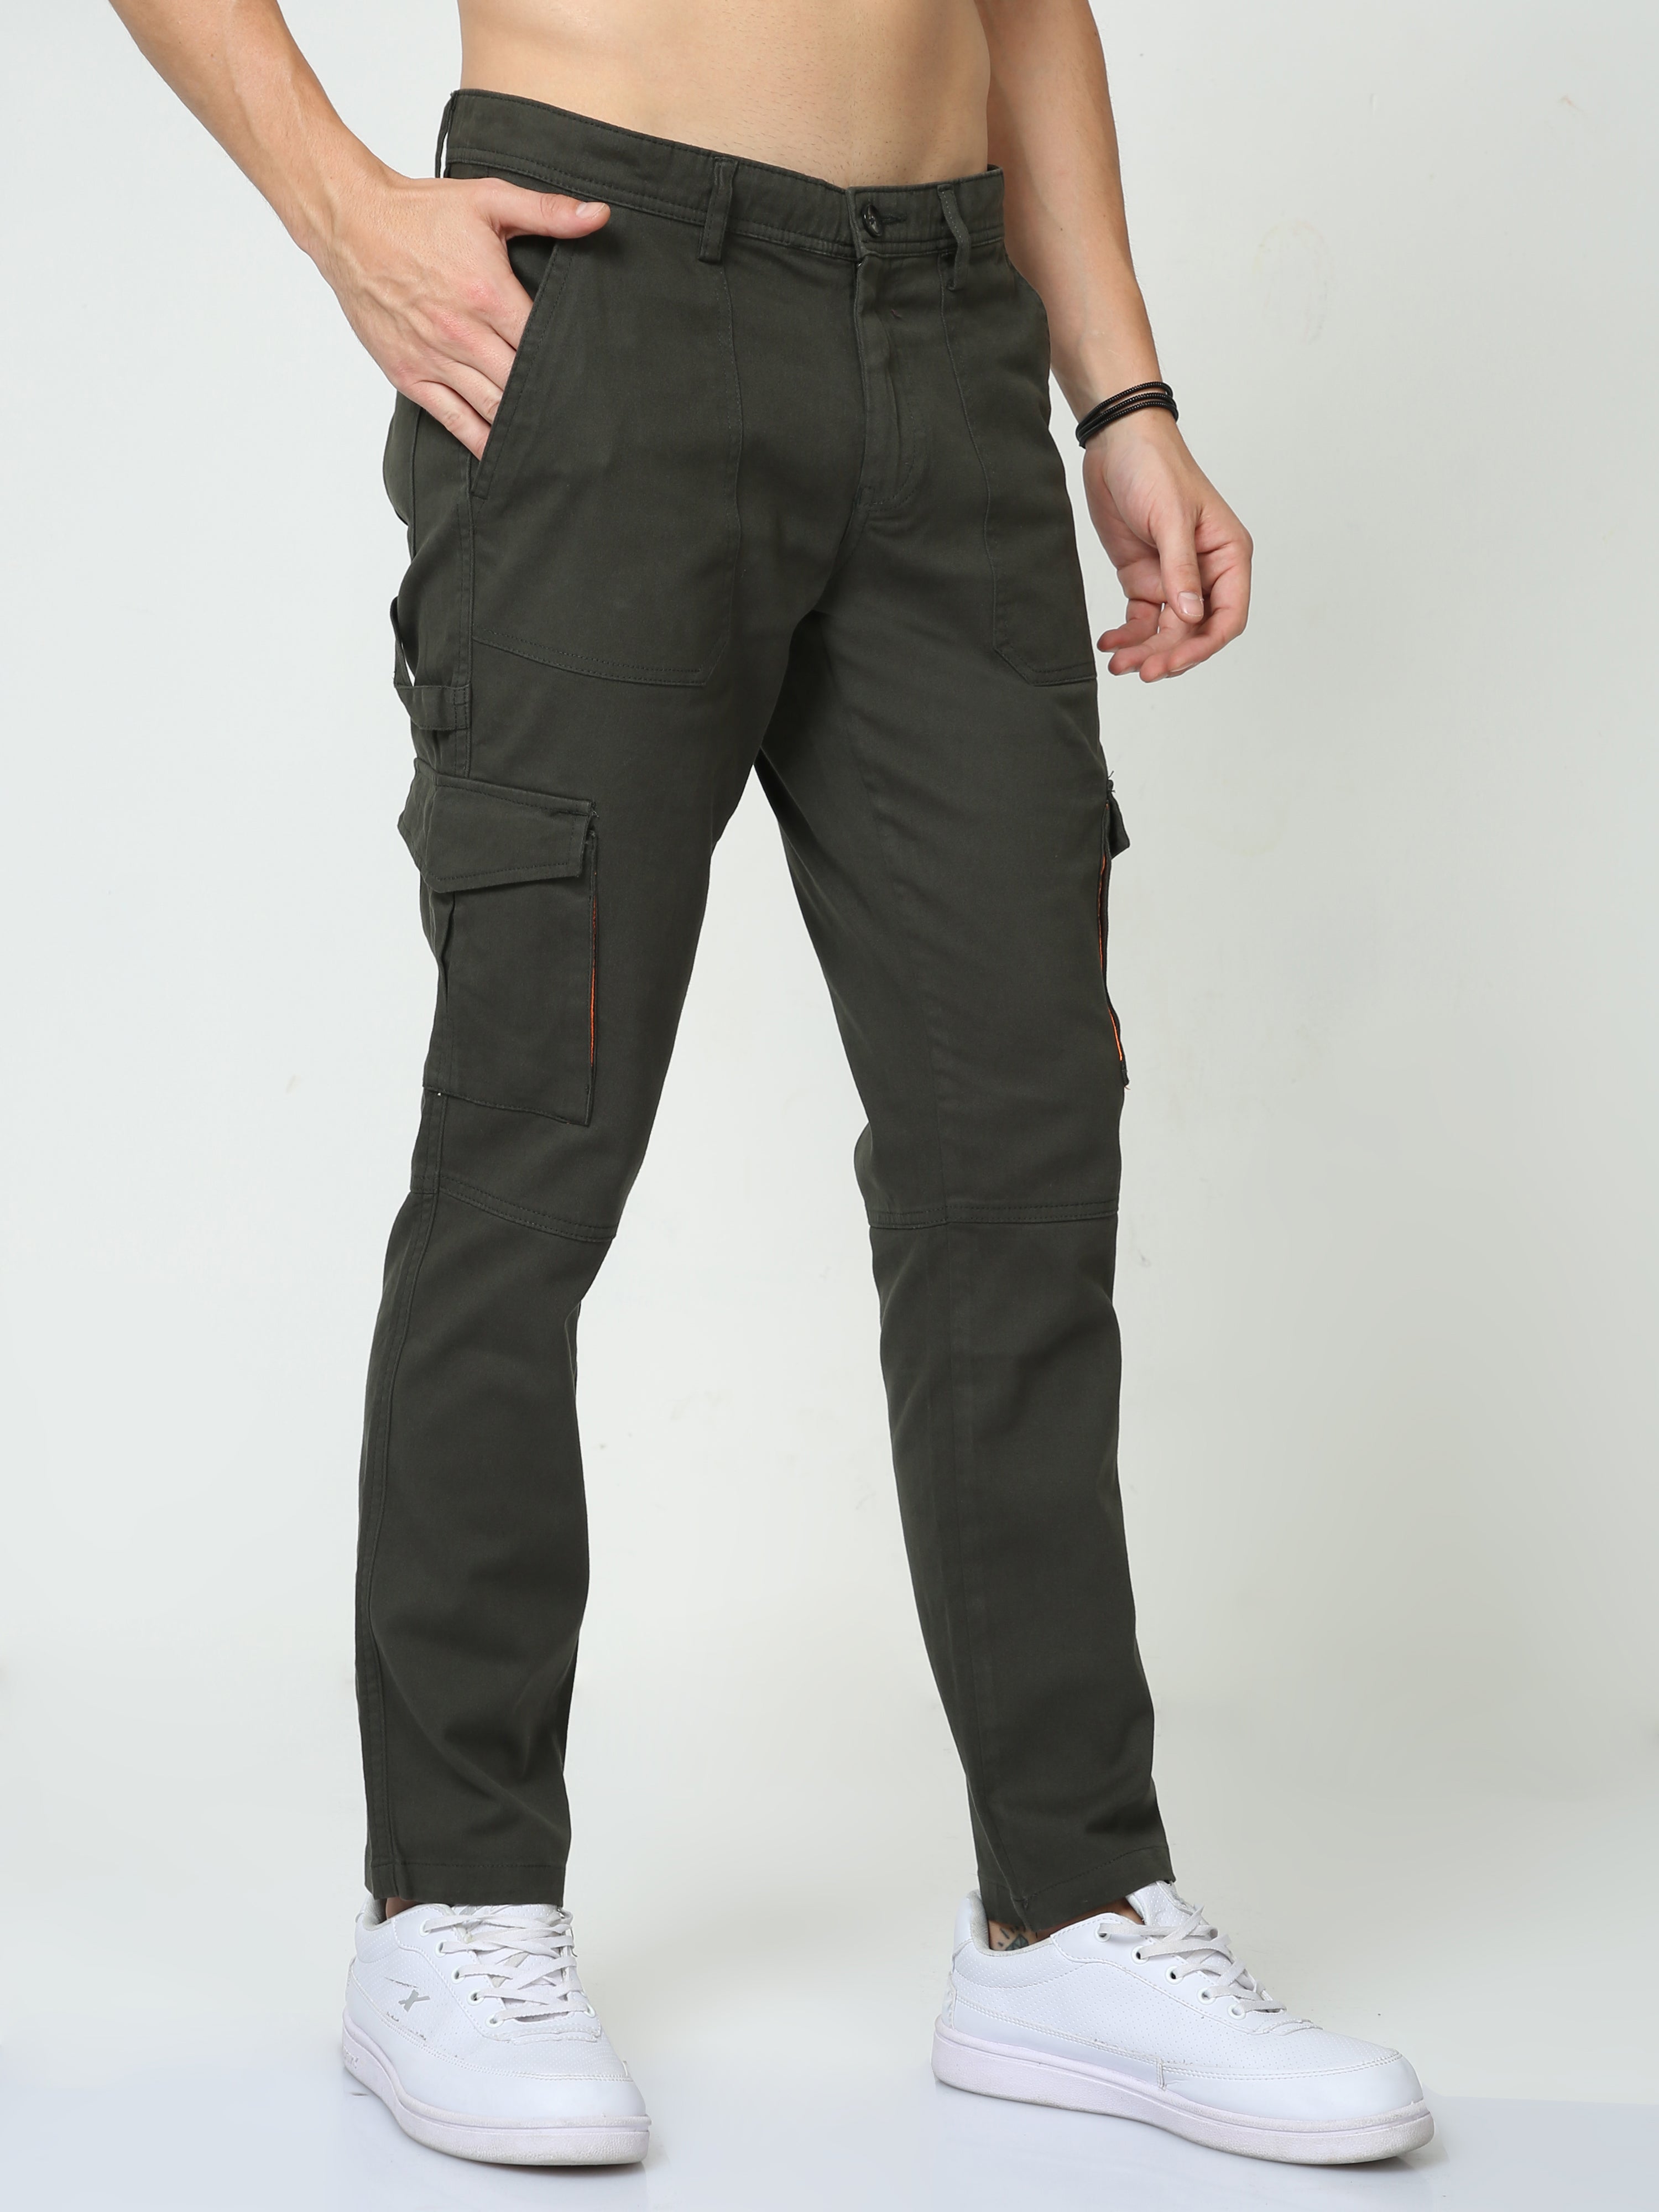 Plain Men Olive Cargo Pant, Loose Fit at Rs 315/piece in Kolkata | ID:  2850396012673